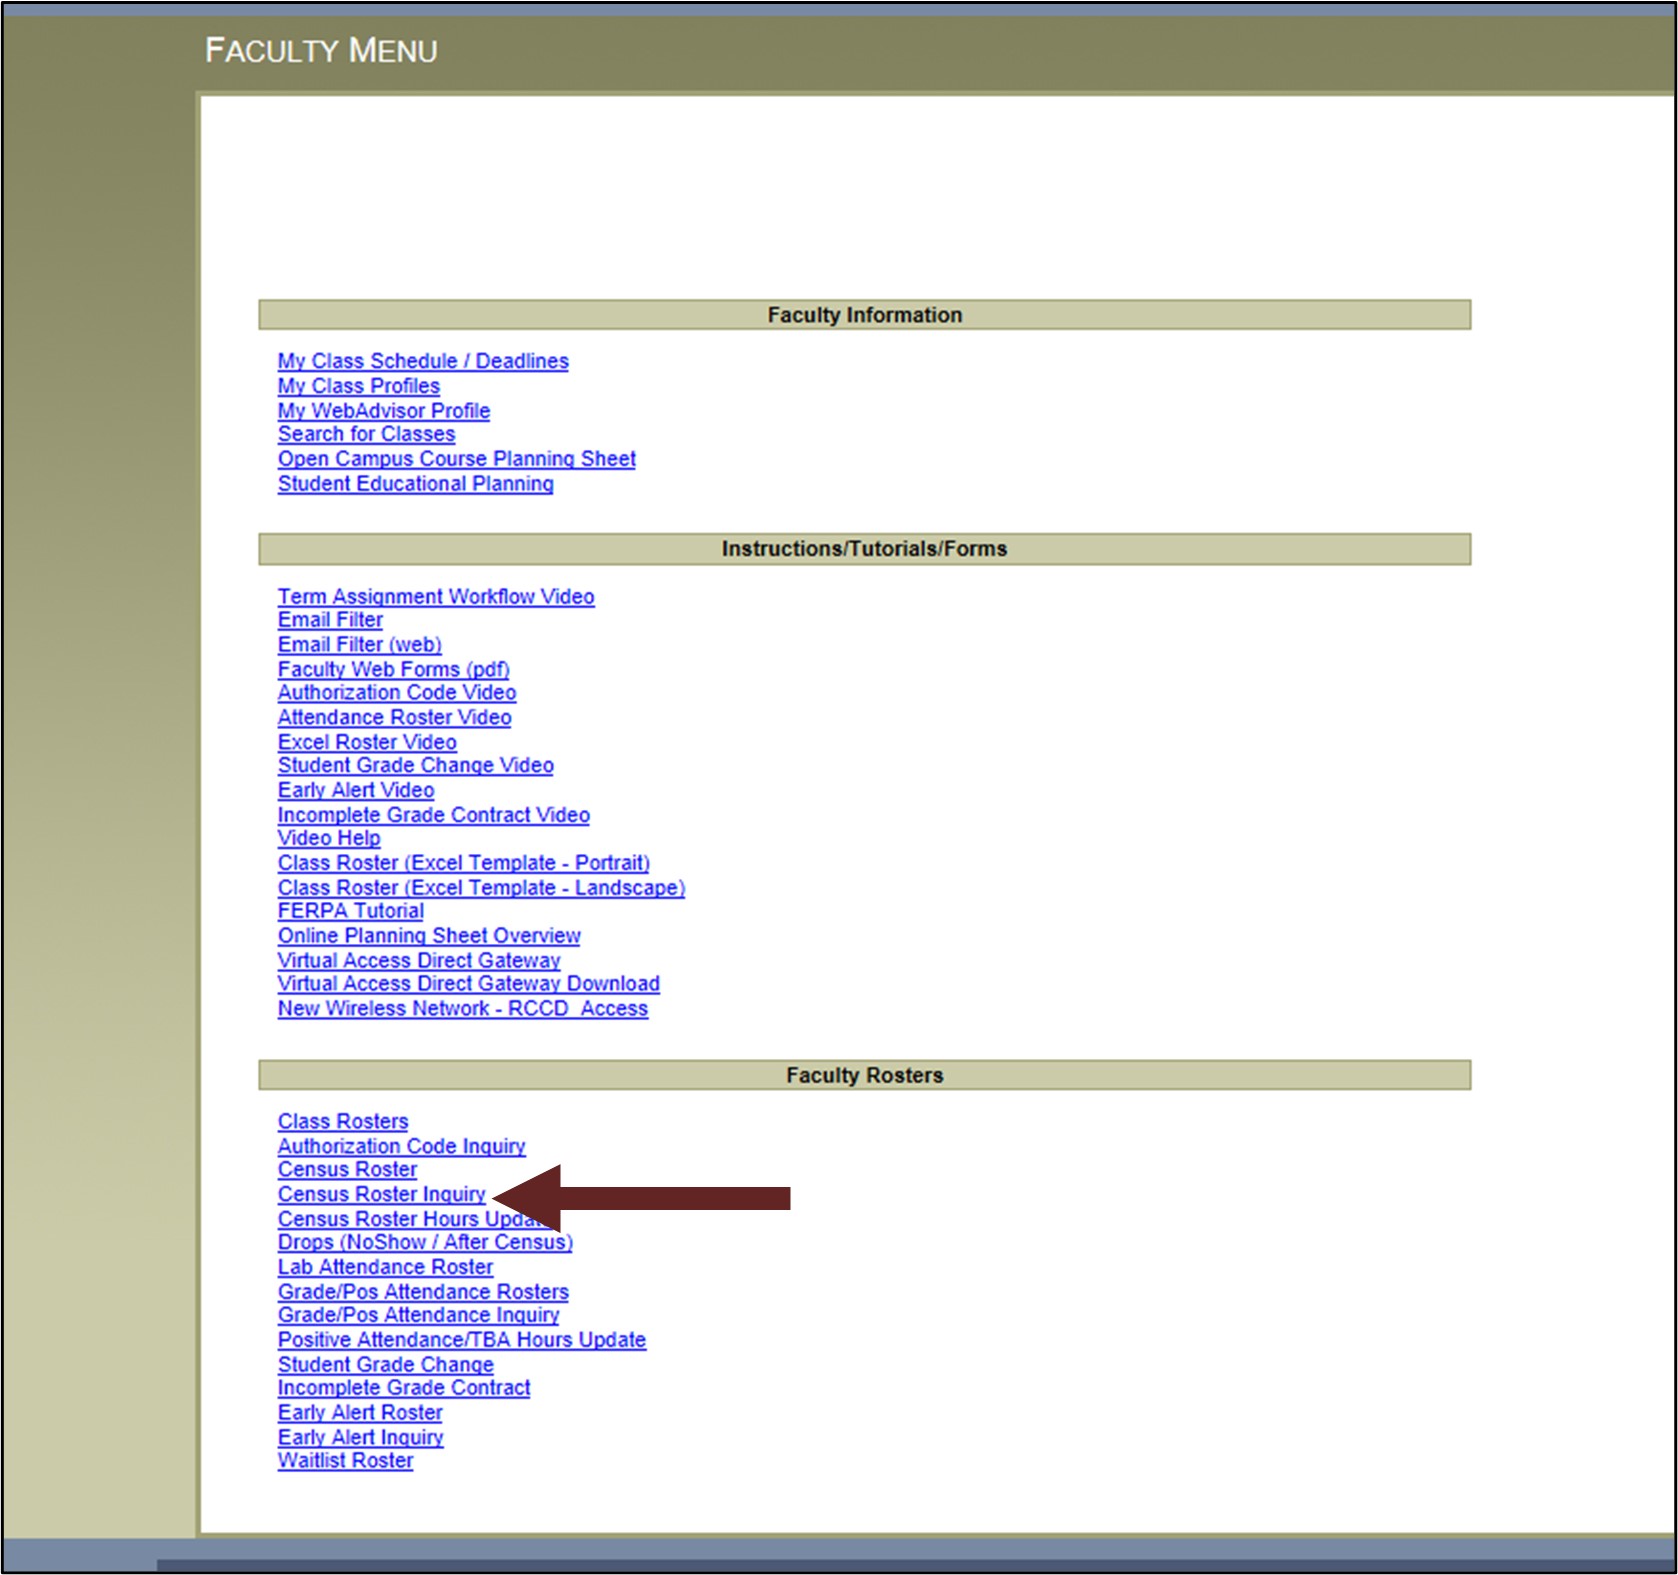 WebAdvisor Faculty Menu with arrow pointing at Census Roster Inquiry